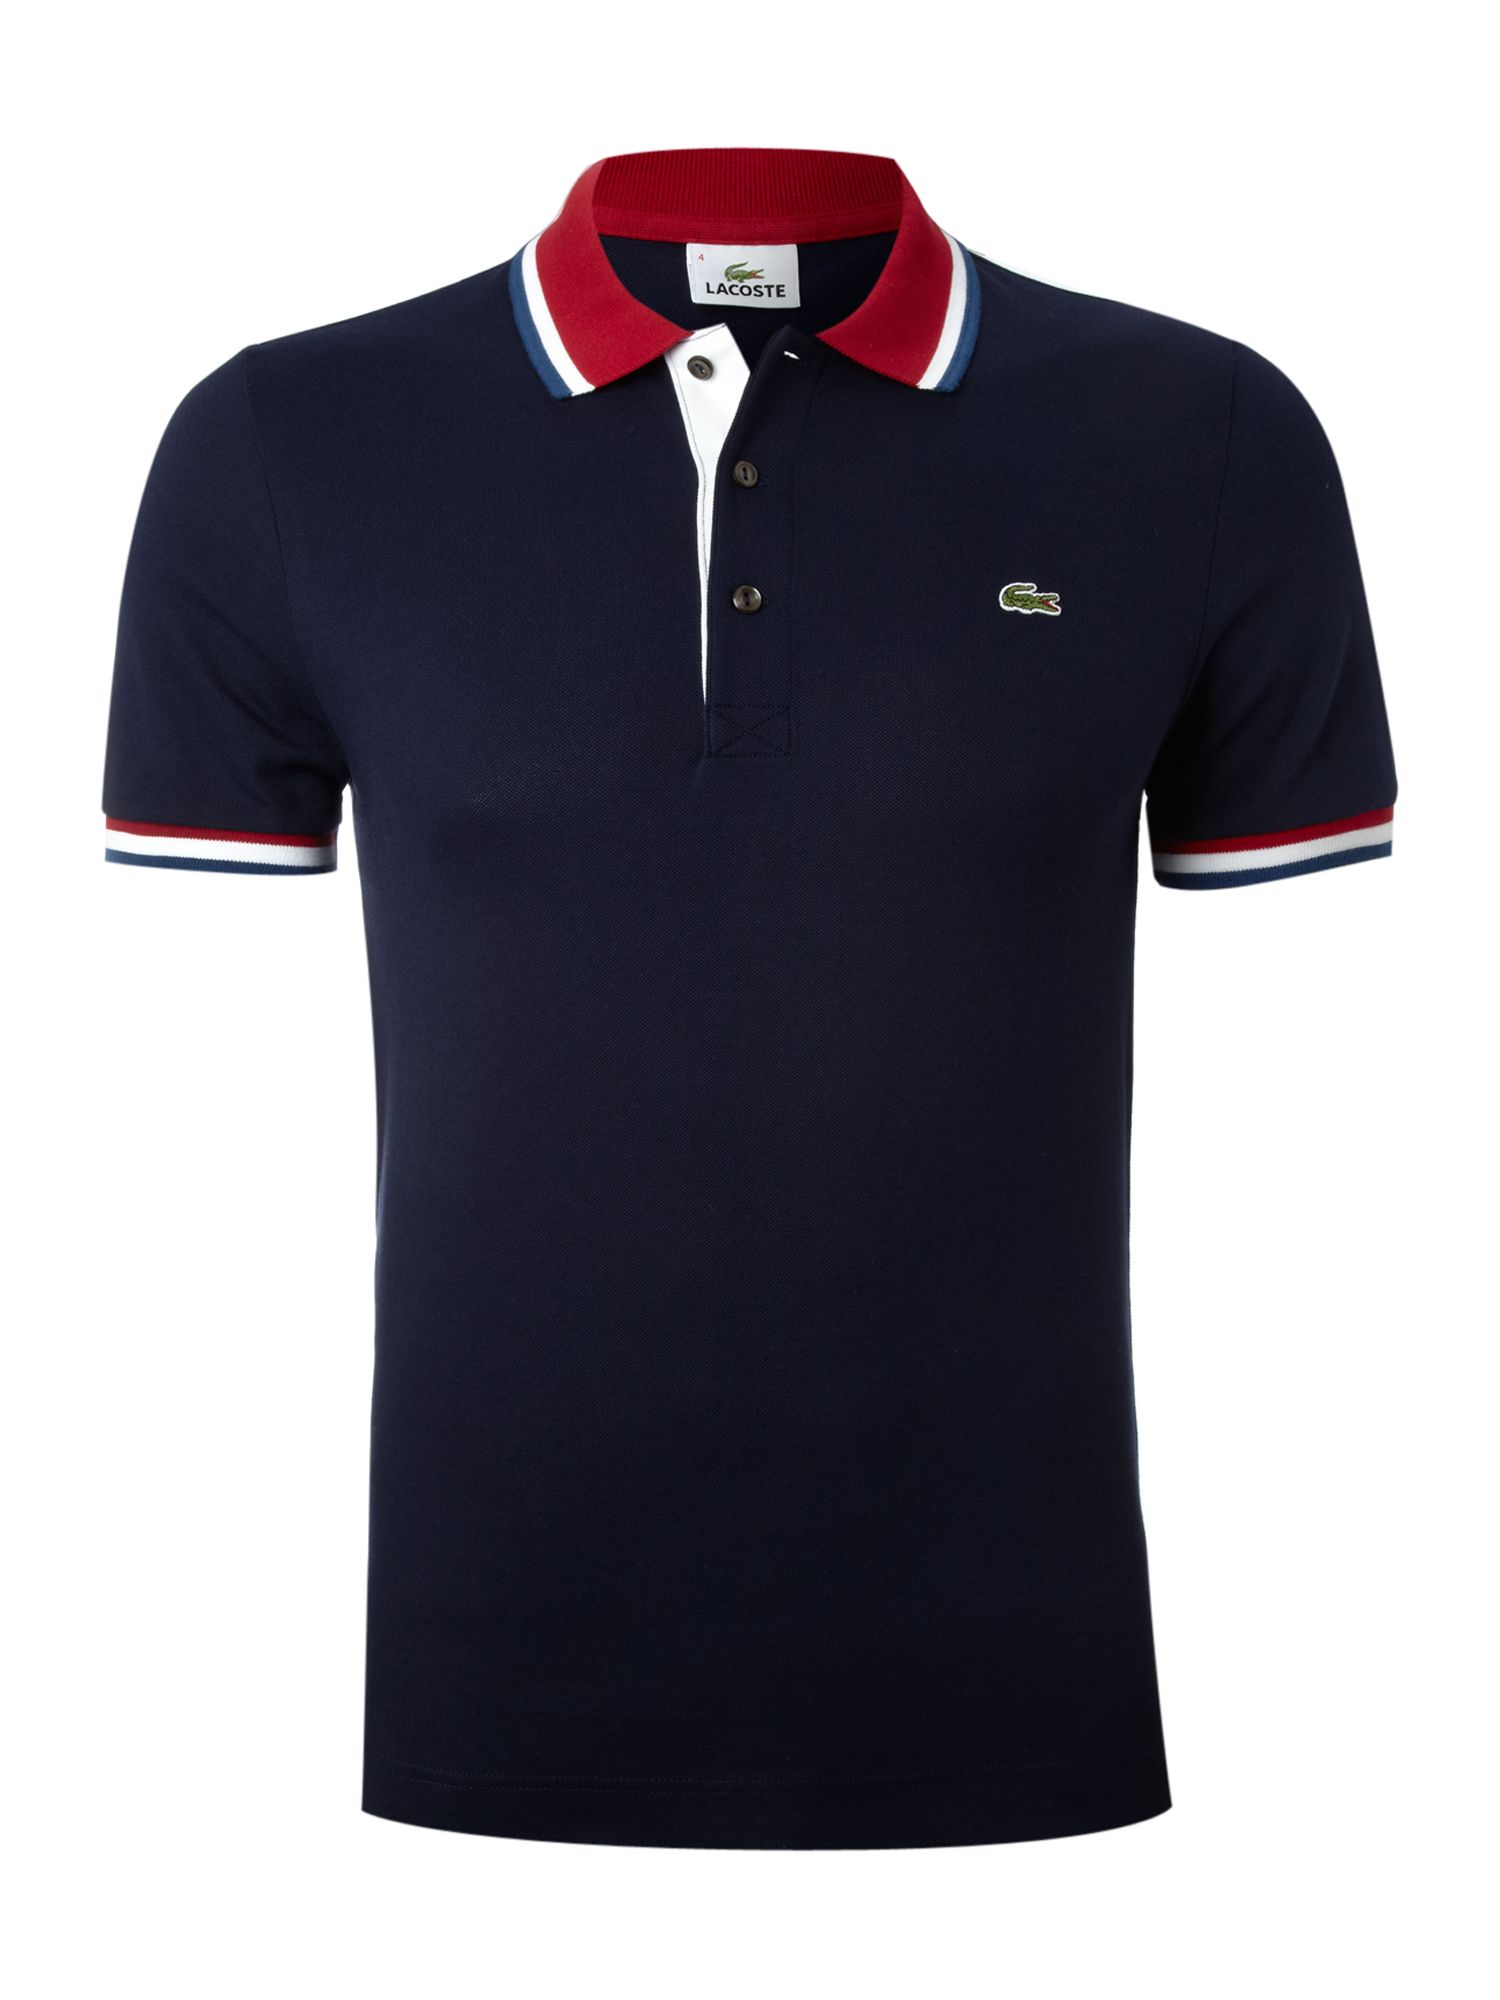 Lacoste Contrast Collar Polo Shirt in Blue for Men - Lyst